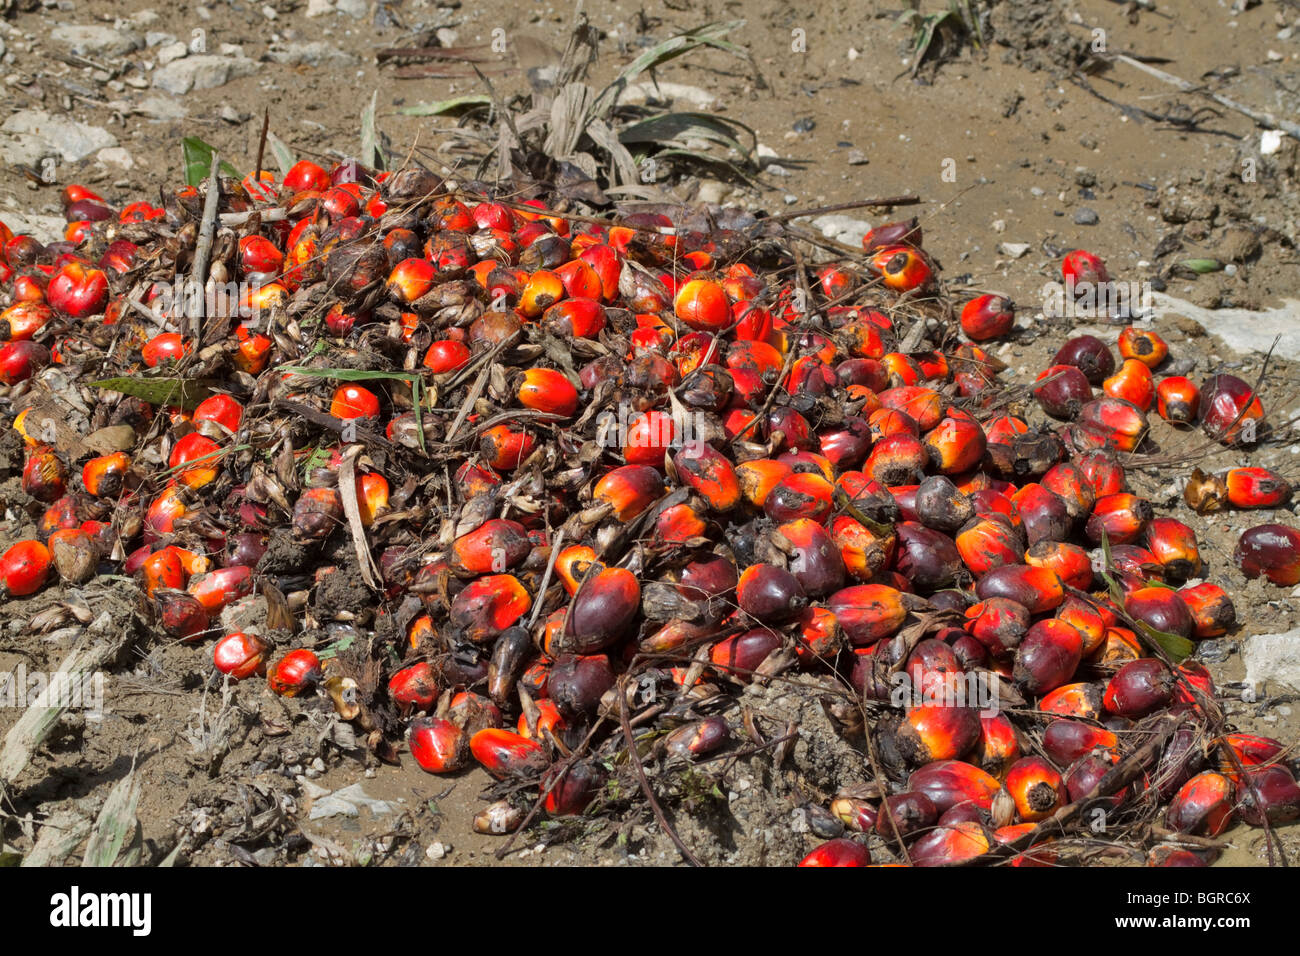 Harvested fruit from an oil palm plantation in Sabah, Malaysian Borneo. Stock Photo